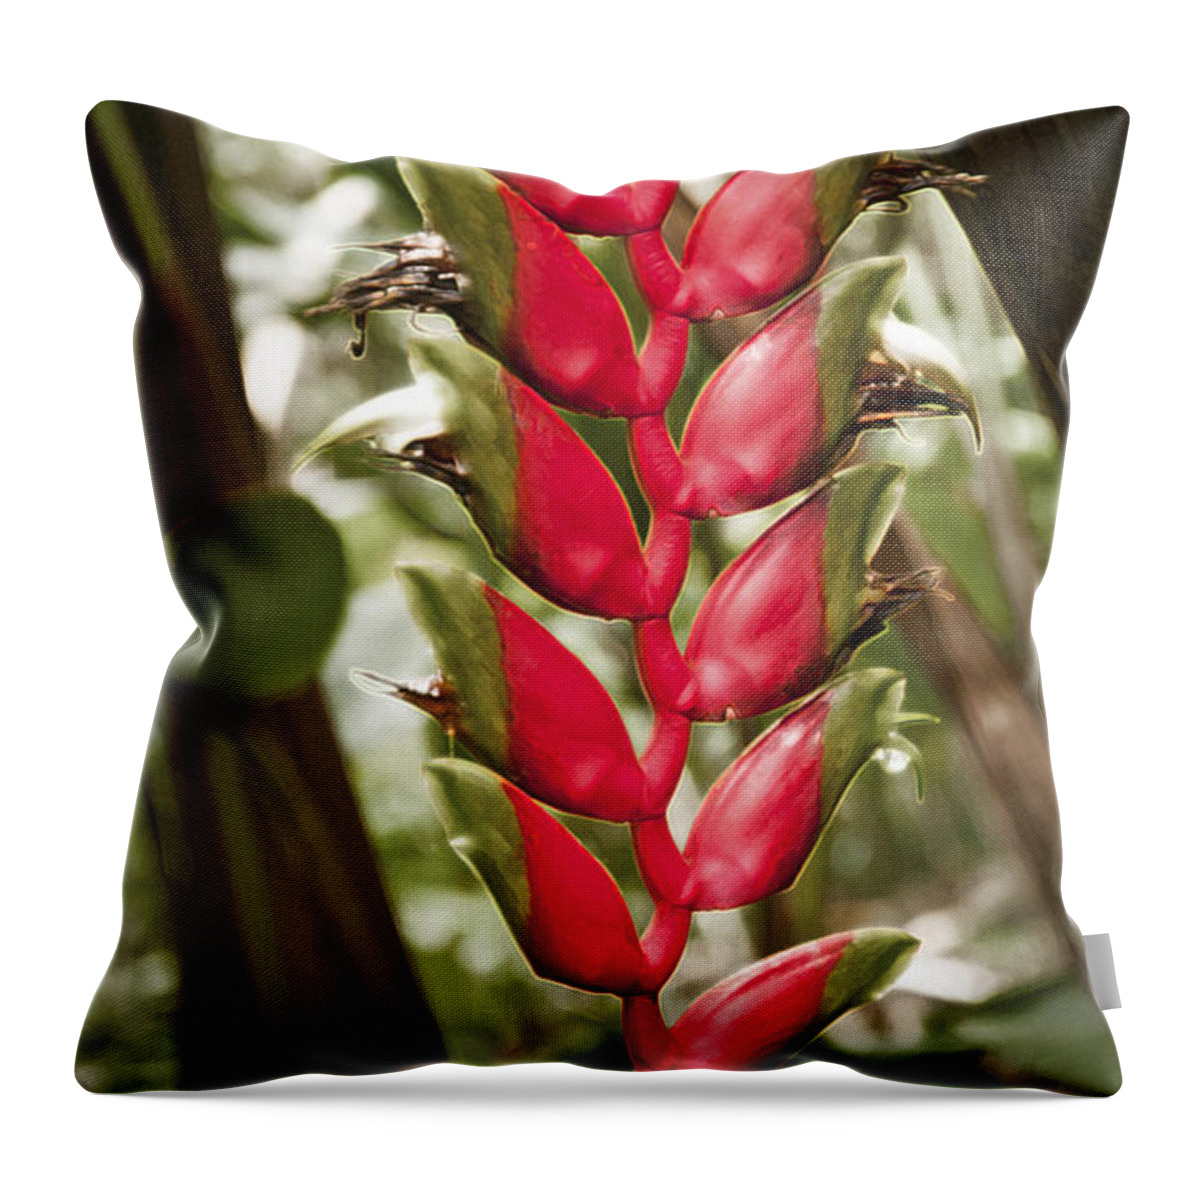 Heliconia Rostrata Throw Pillow featuring the photograph Lobster Claw by Steven Sparks